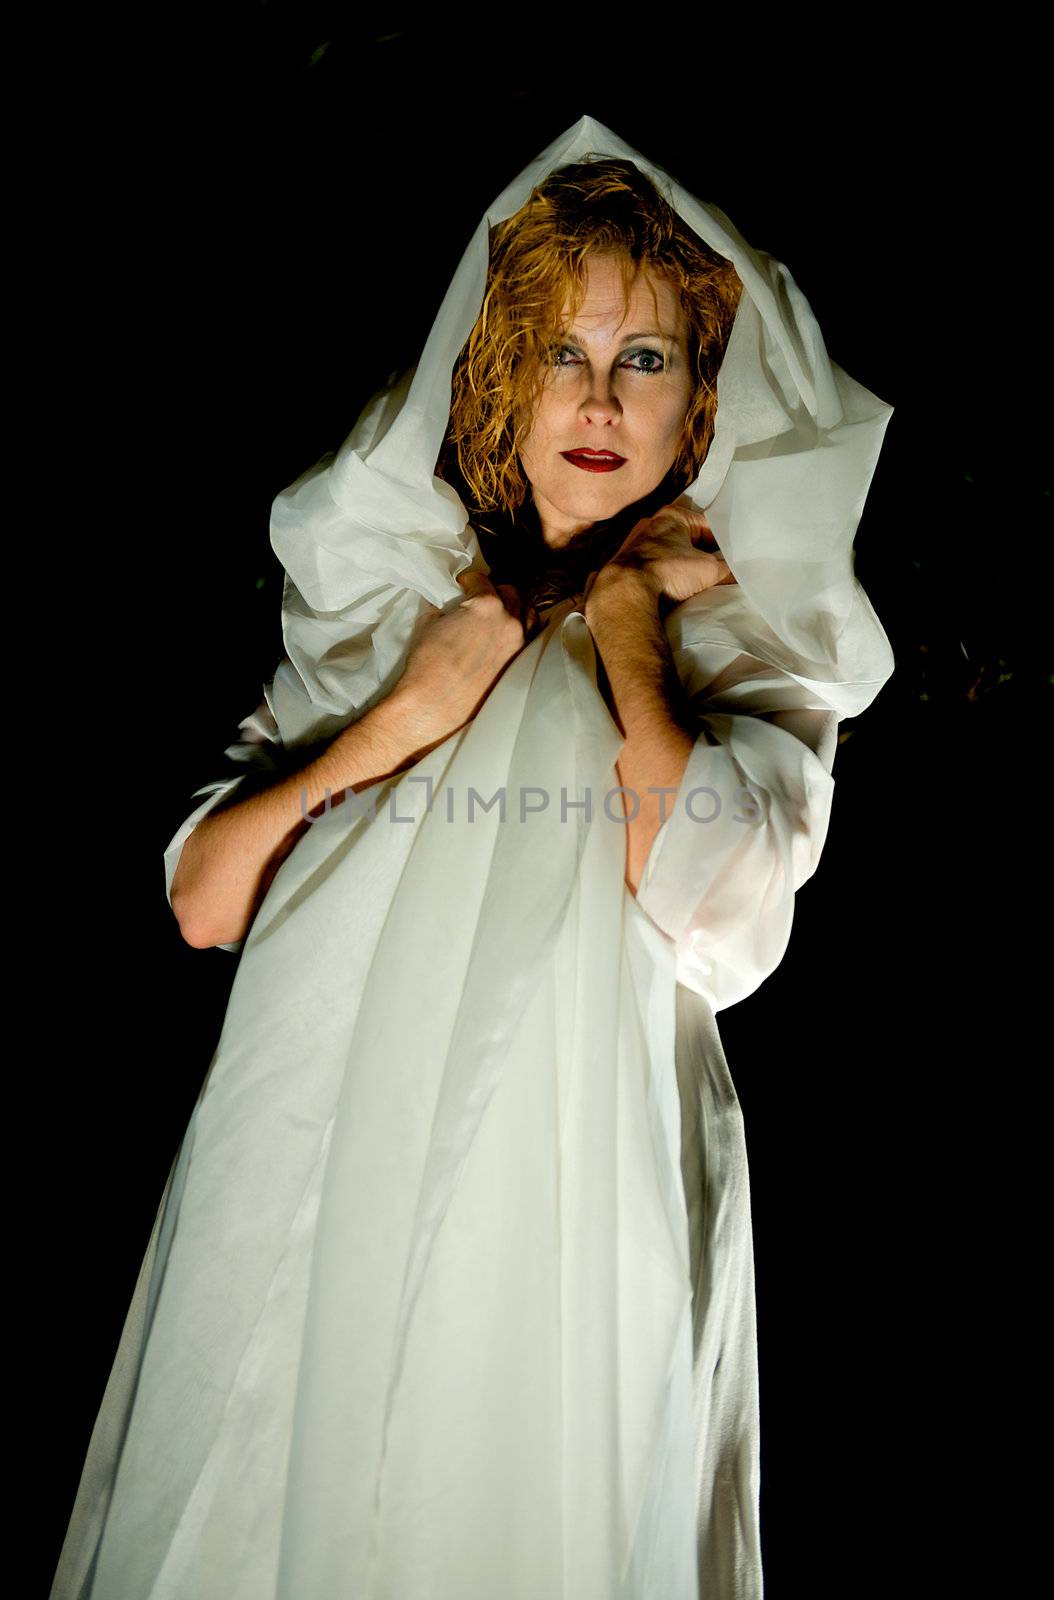 Mysterious woman wrapped in white cloth by dmvphotos